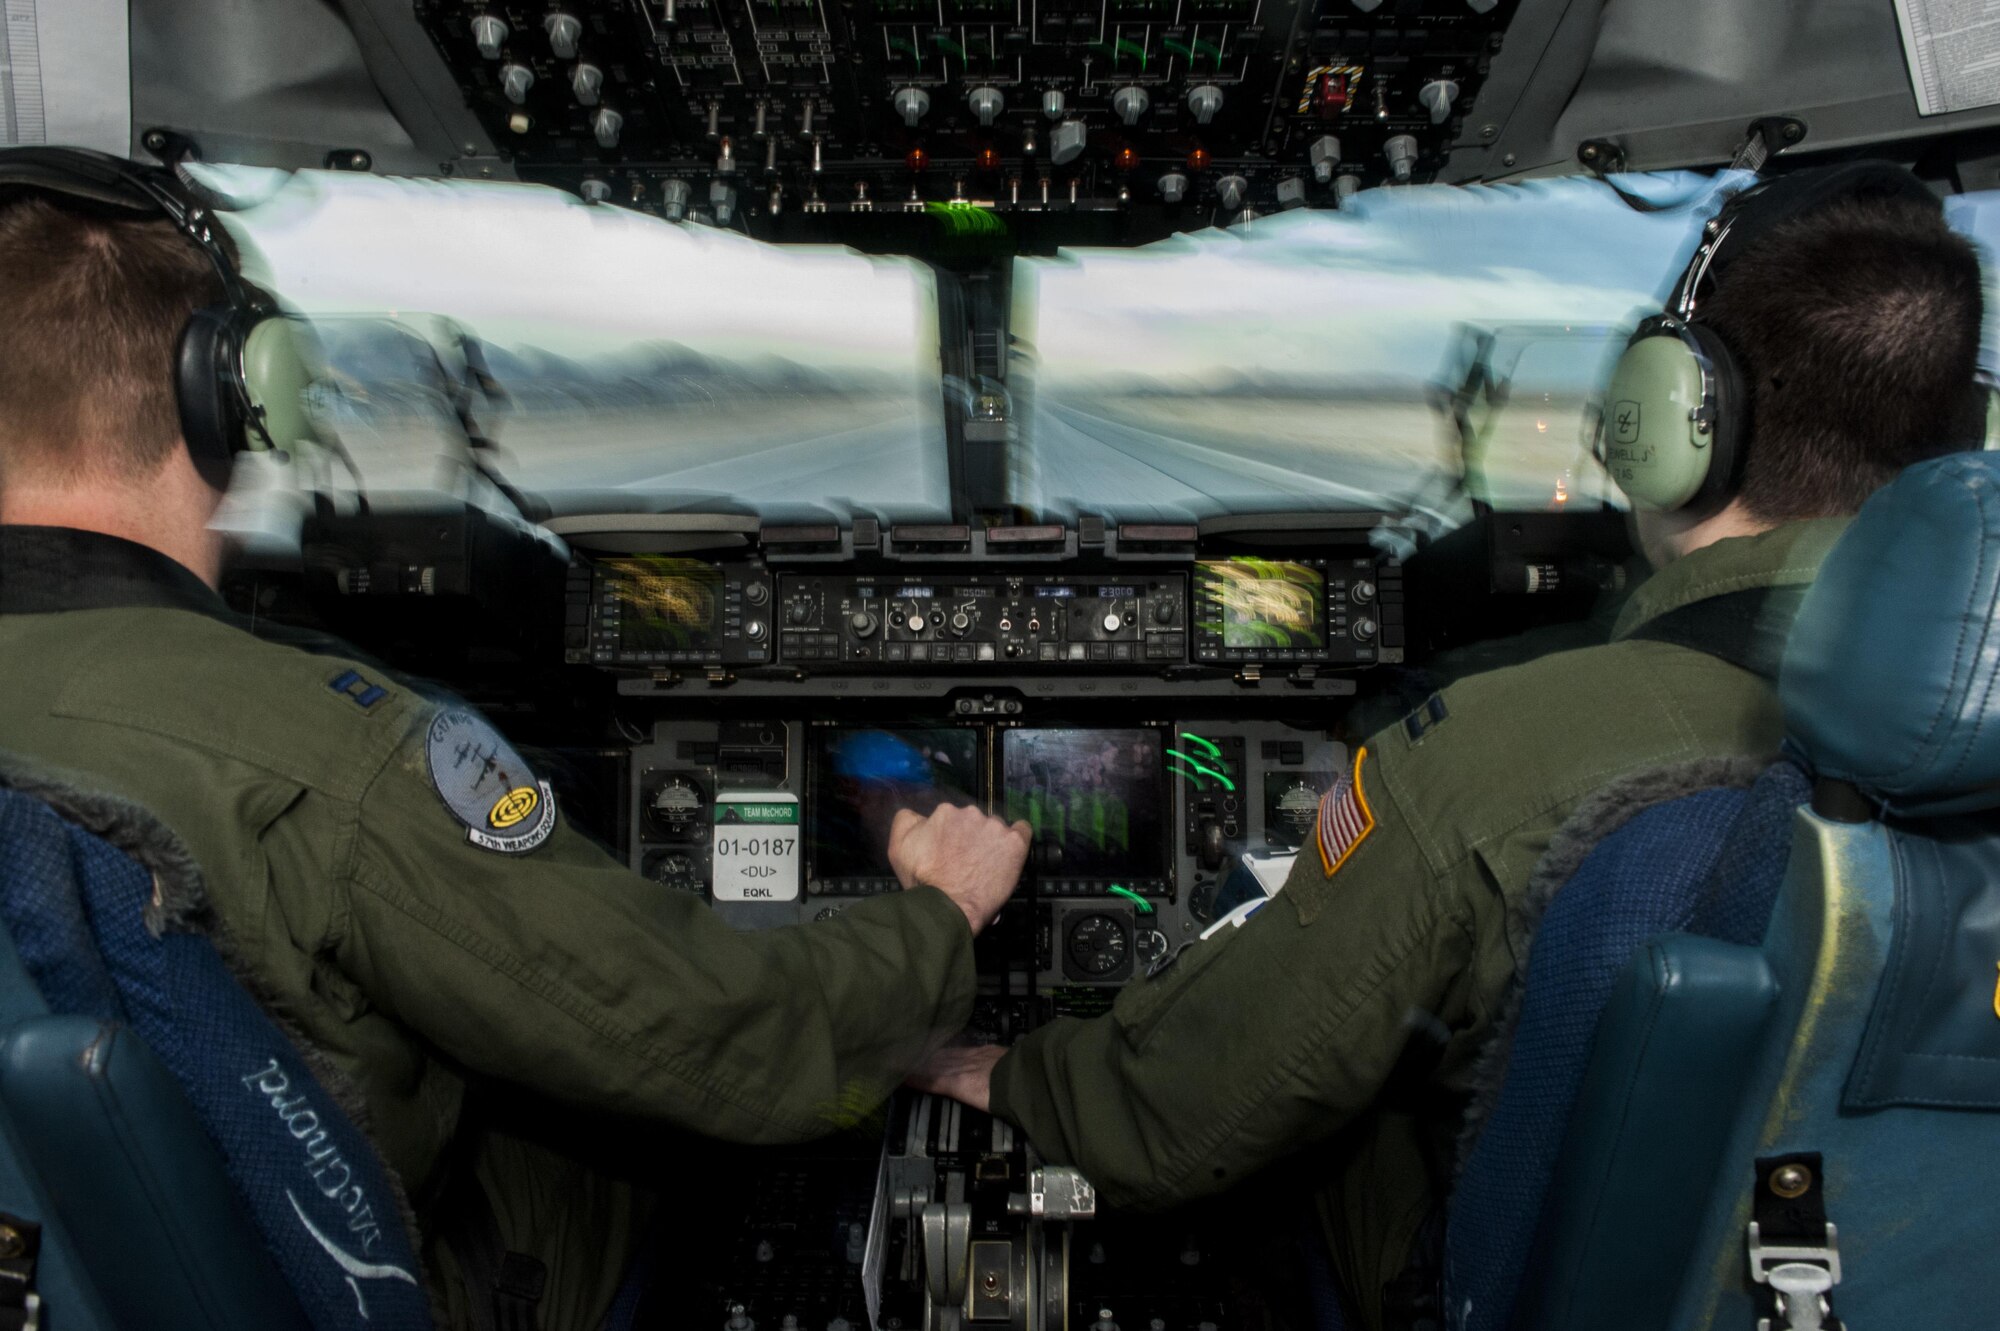 Capt. Mike “Havac” Gilpatrick, a pilot assigned to the 9th Airlift Squadron, Joint Base McGuire-Dix-Lakehurst, N.J., and Capt. Jason “Brick” Sewell, a pilot assigned to the 43rd Operation Support Squadron pilot, Pope Air Force Base, N.C., take-off in a C-17 Globemaster III from Nellis Air Force Base, Nev., Dec. 10, 2016. The C-17 Globemaster III is the newest, most flexible cargo aircraft to enter the airlift force. (U.S. Air Force photo by Airman 1st Class Kevin Tanenbaum)